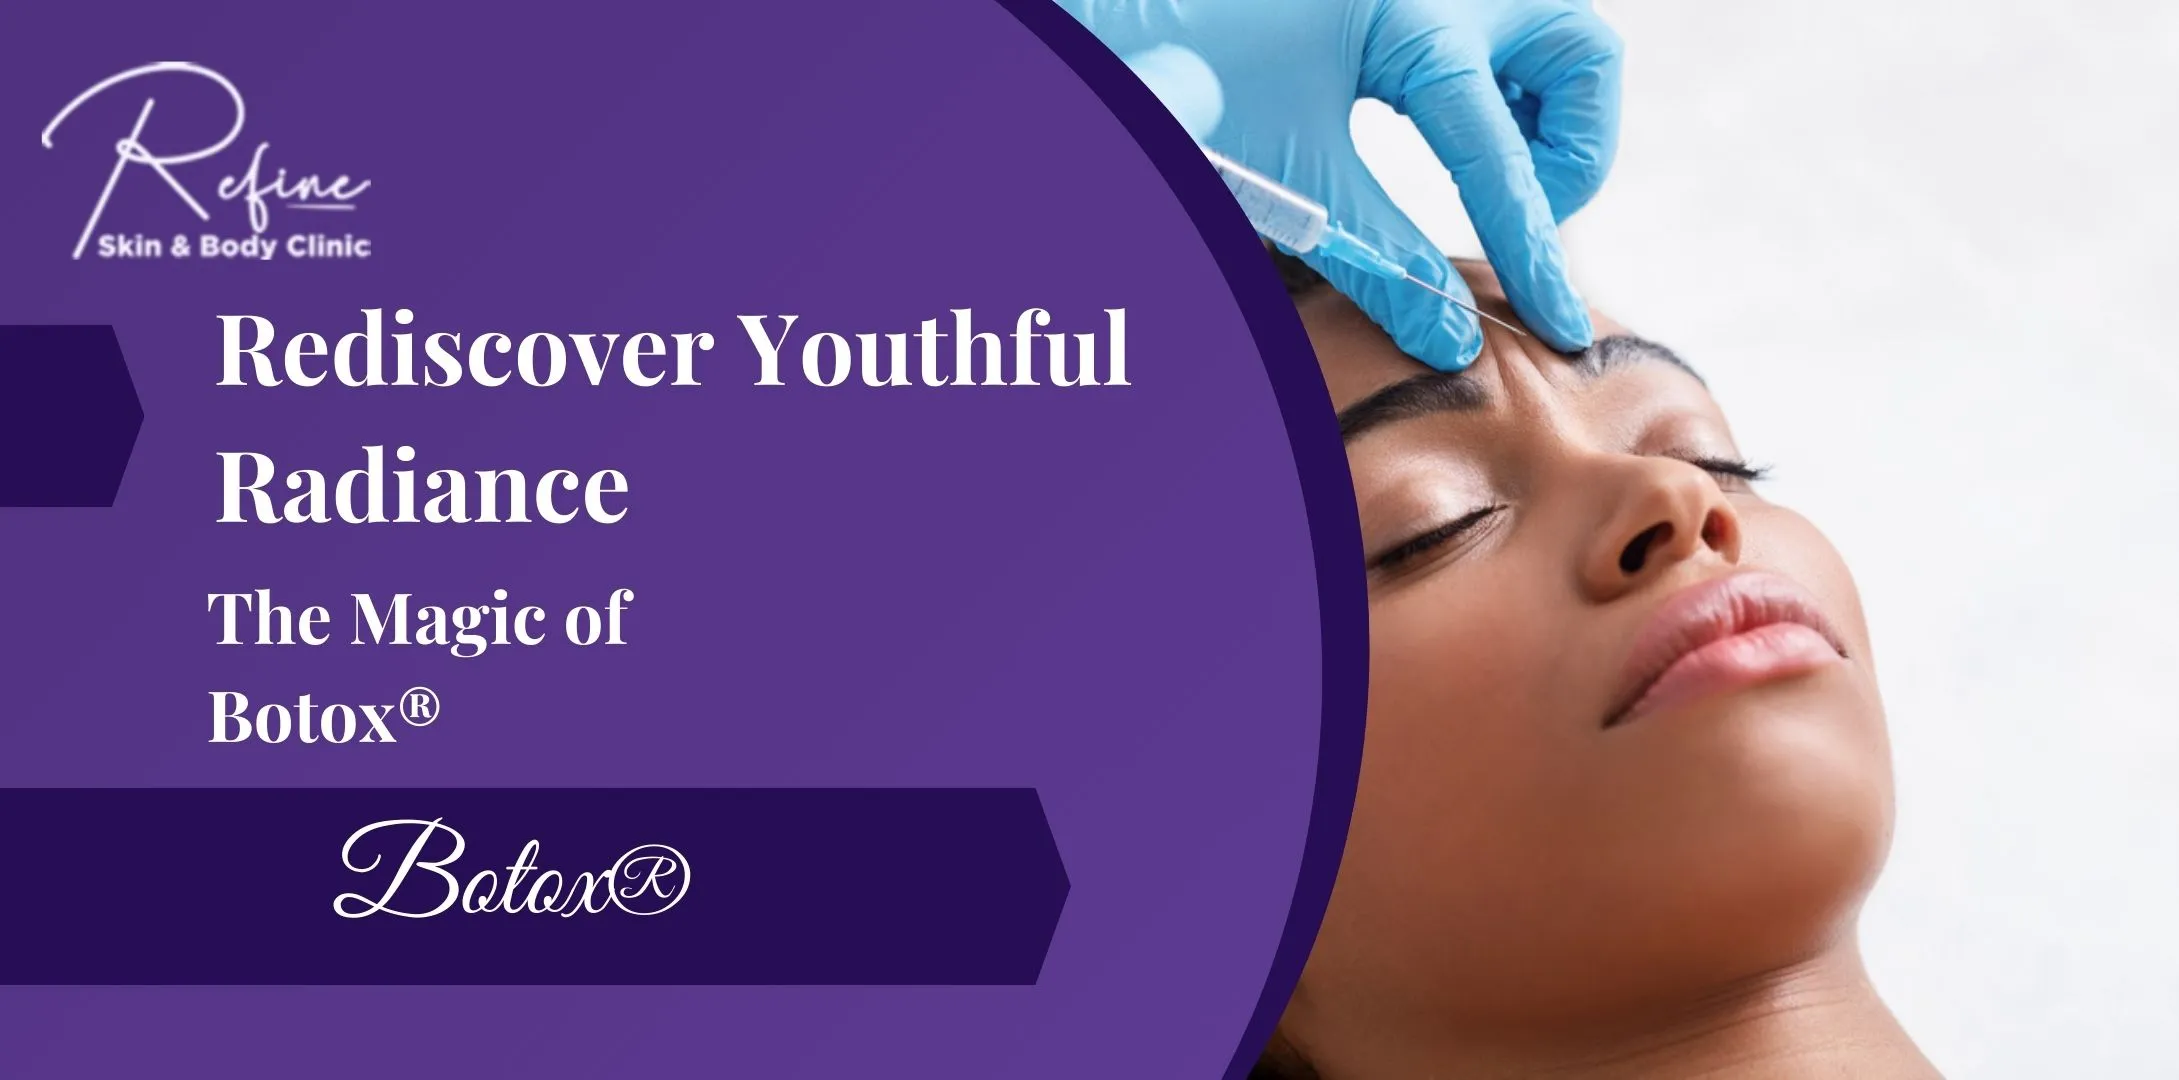 Rediscover Youthful Radiance: The Magic of Botox®